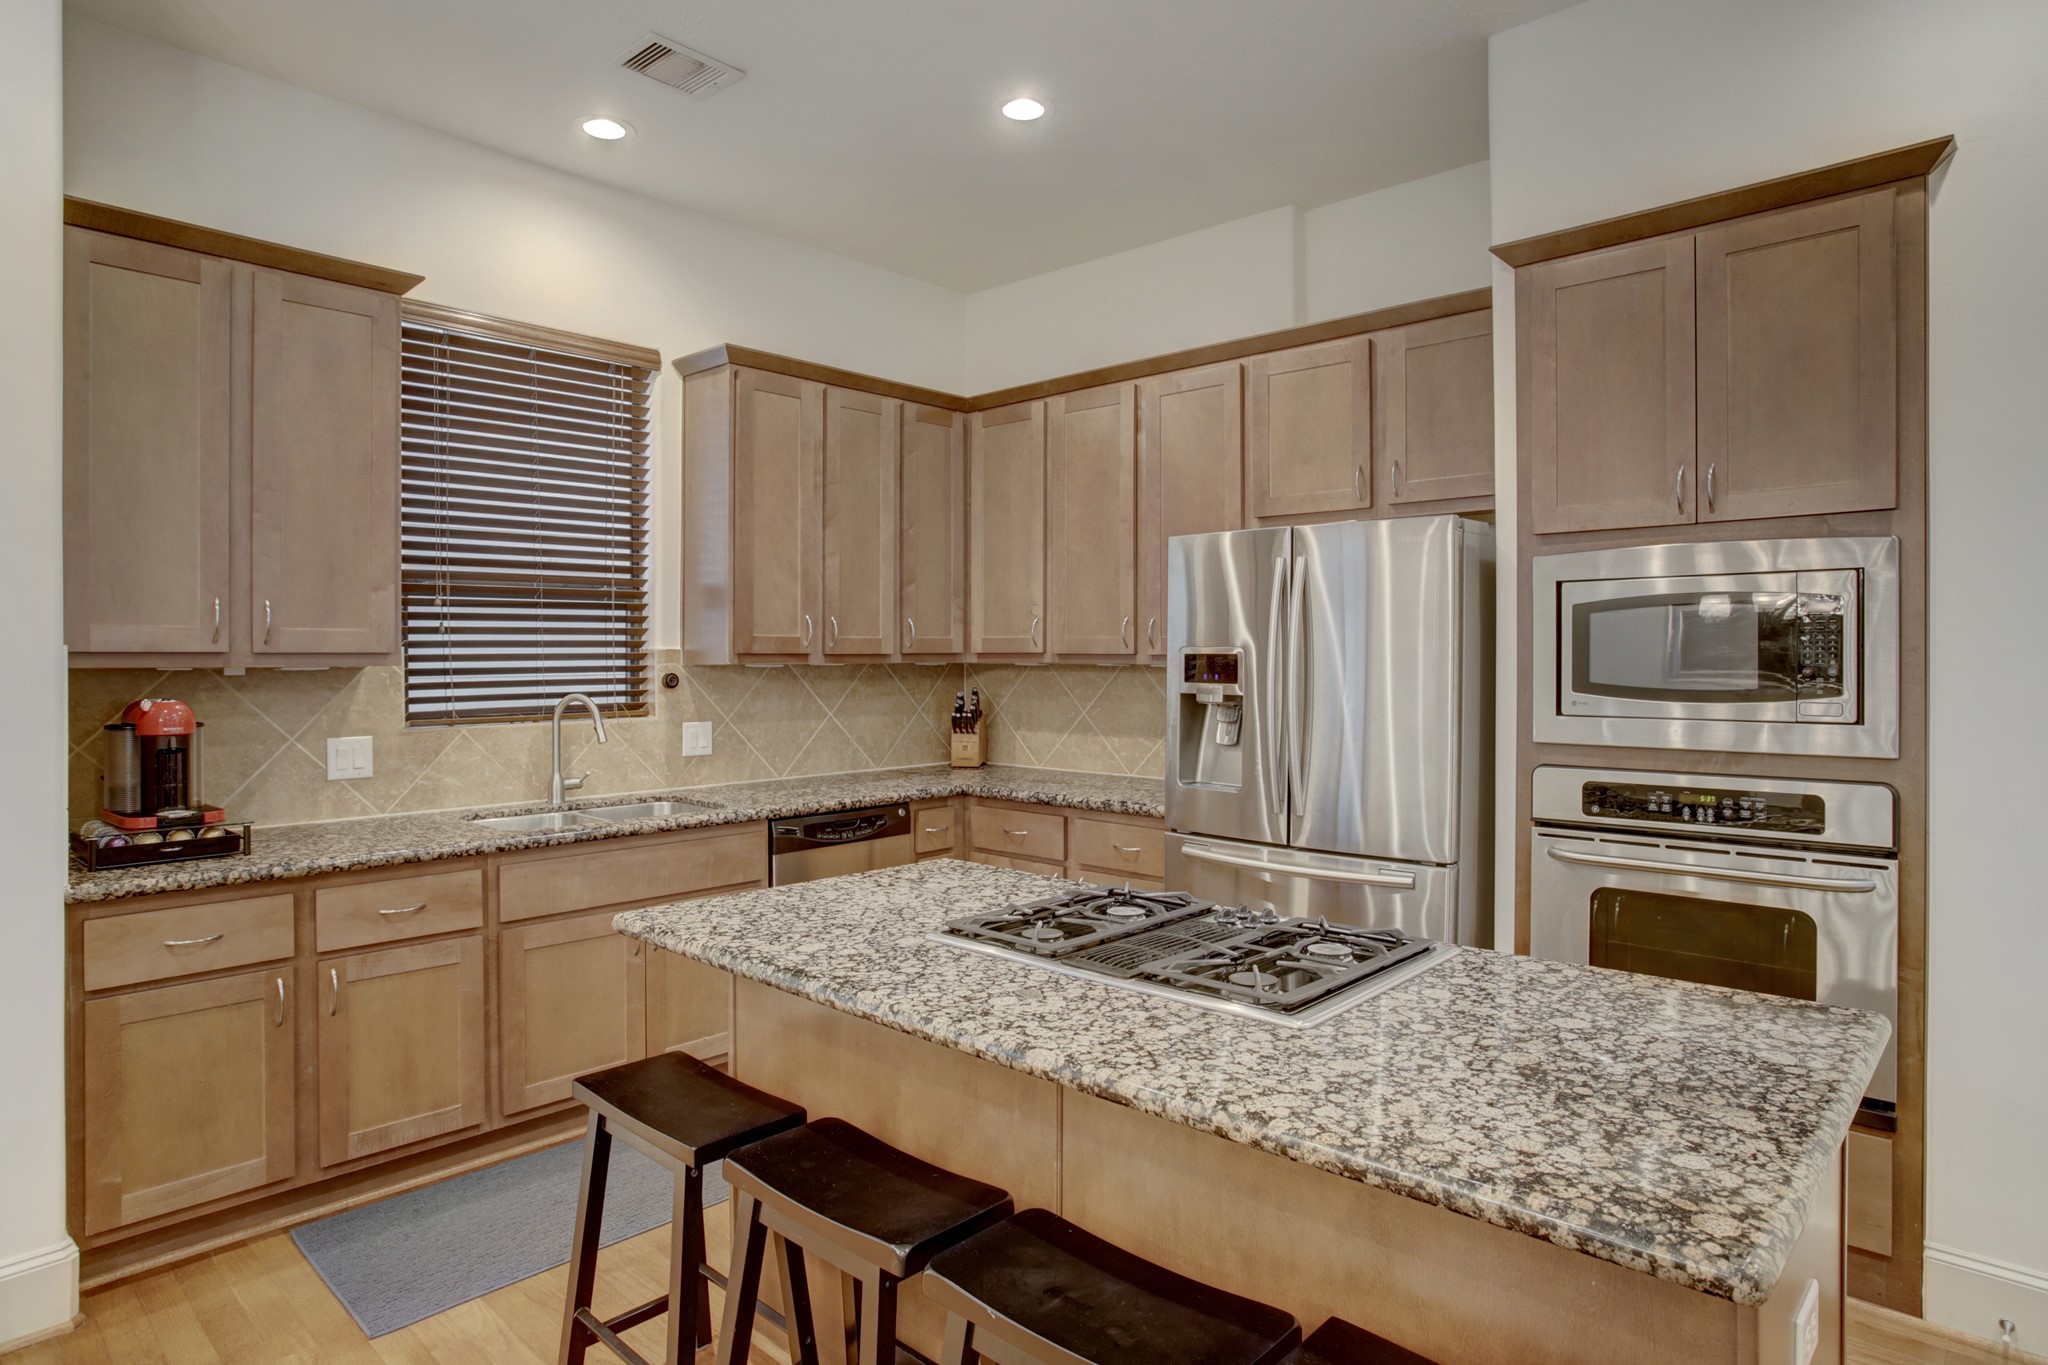 Cooks dream kitchen with granite counter tops and all stainless steel appliances including the refrigerator.